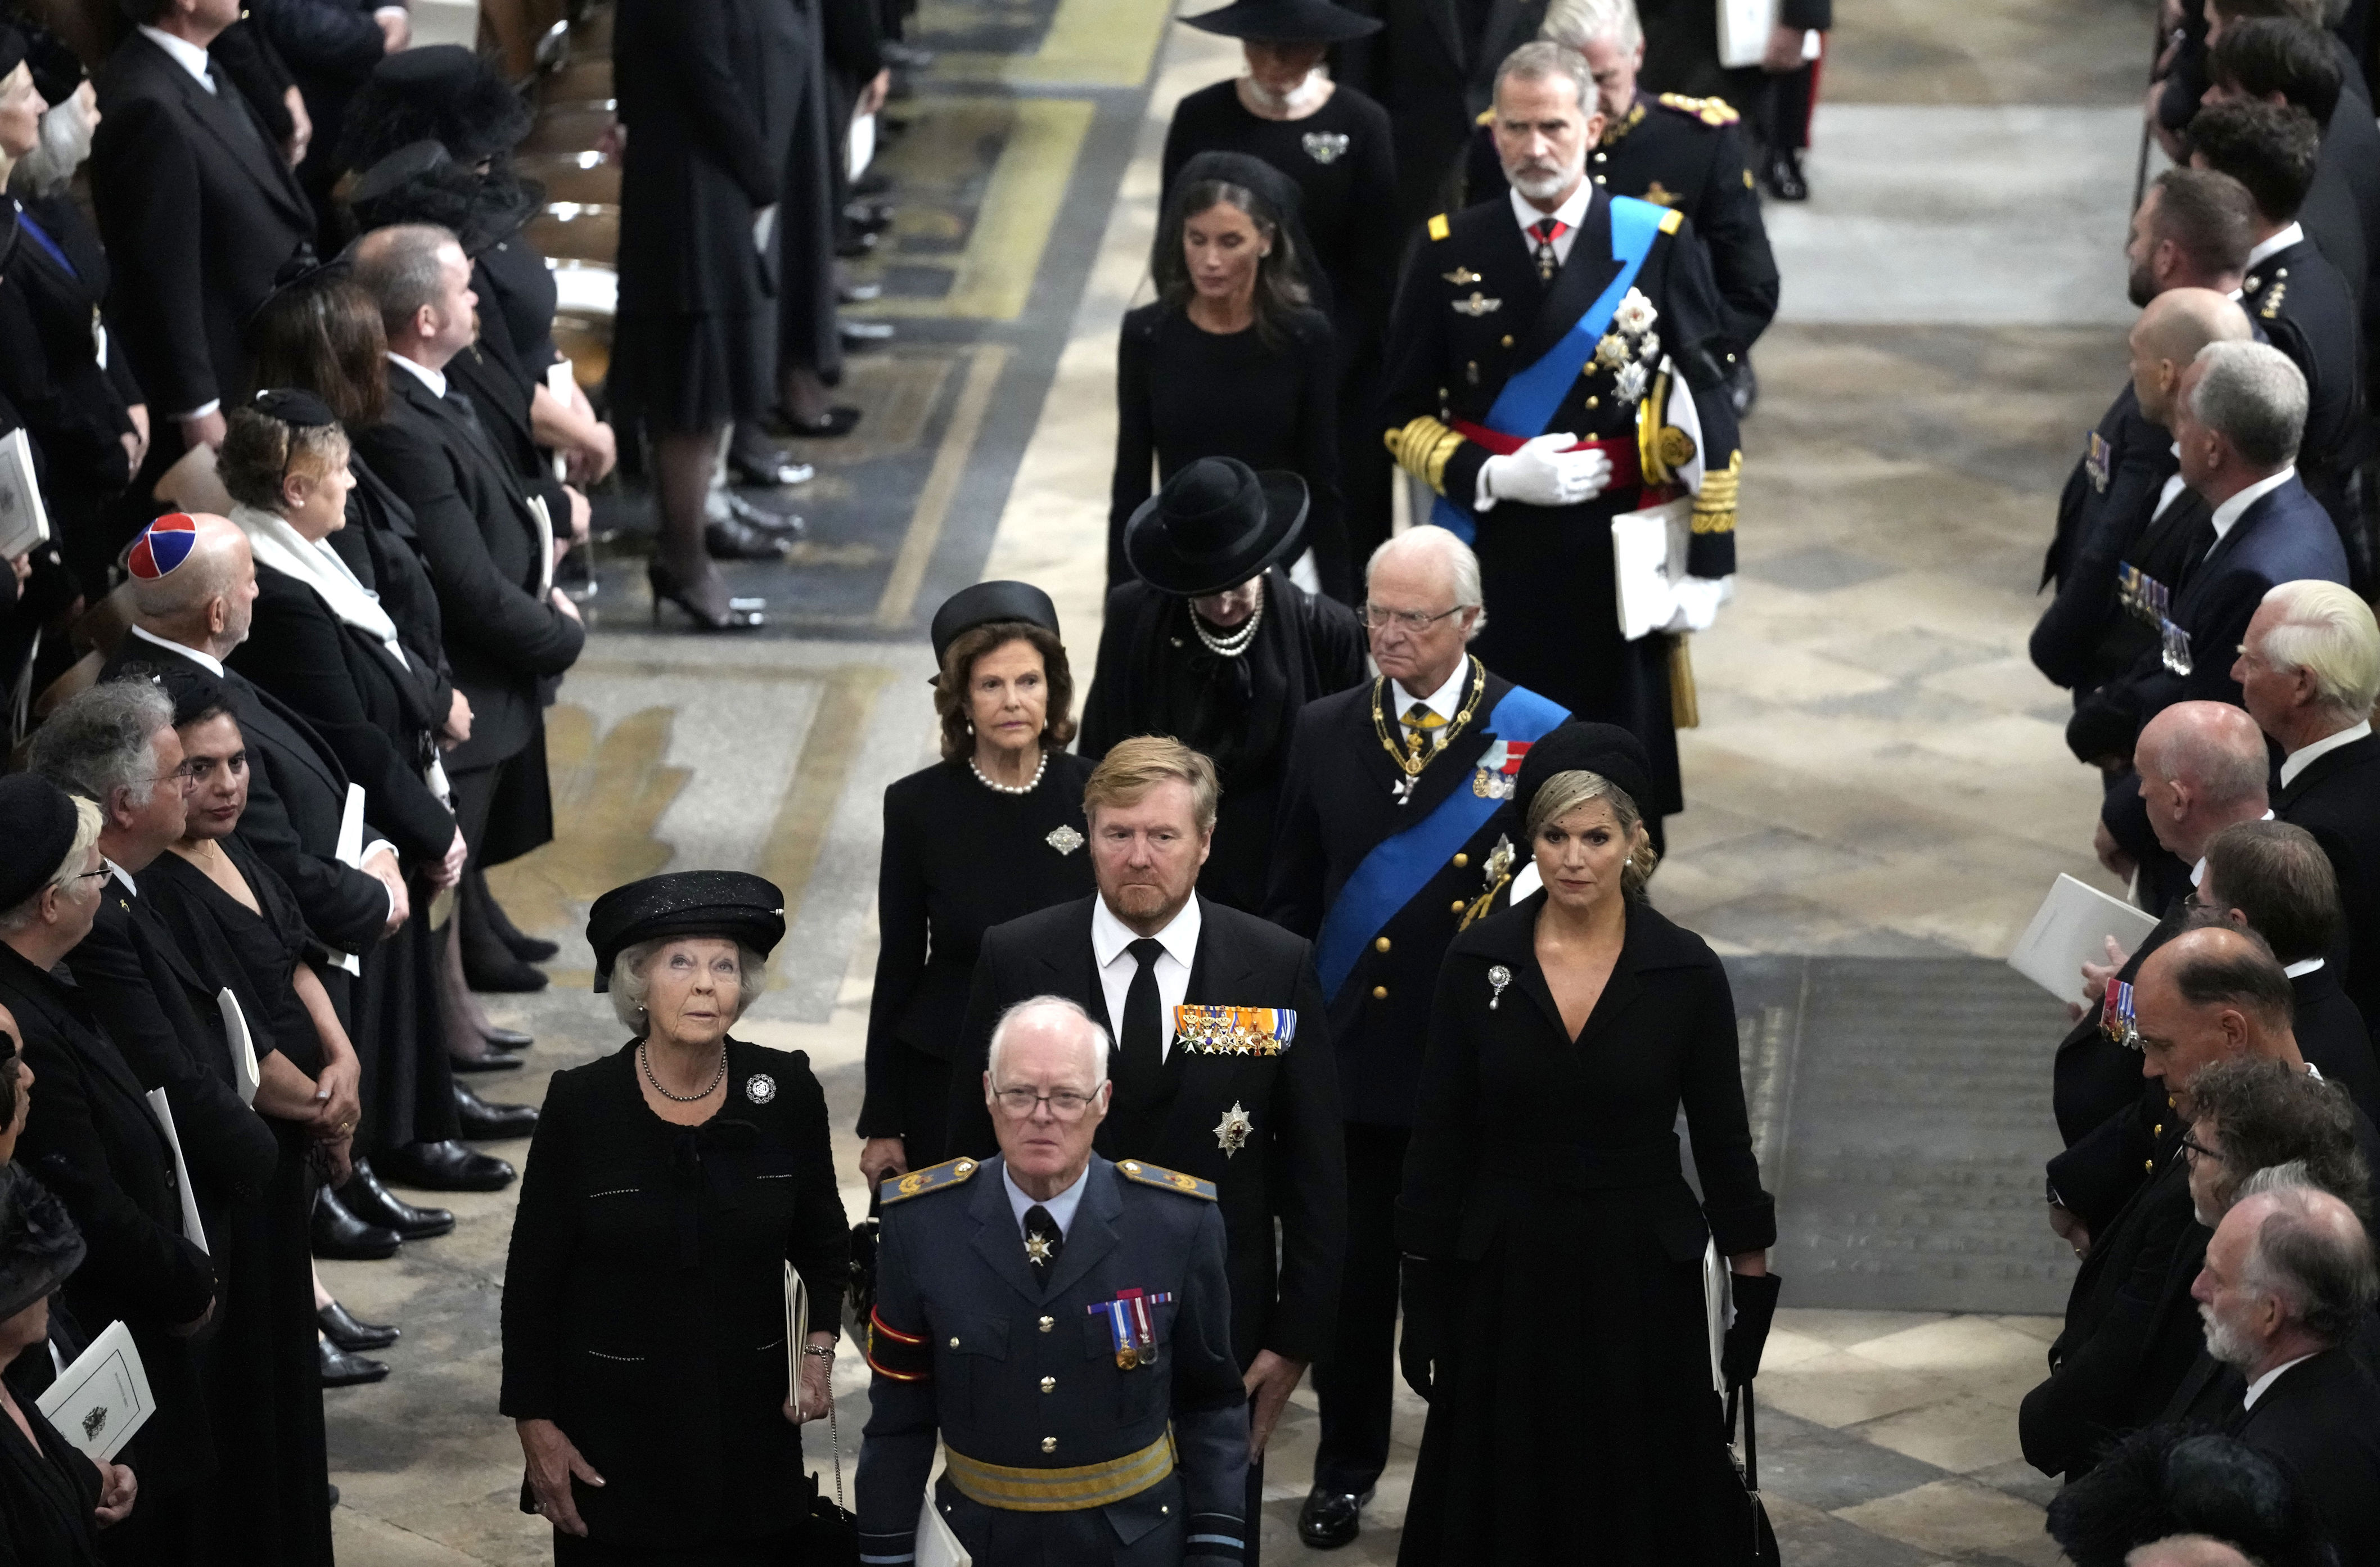 <p>World leaders and royals -- including The Netherlands' former Queen Beatrix and son King Willem-Alexander and his wife, Queen Maxima, followed by Sweden's King Carl Gustaf XVI and Queen Silvia, and Spain's King Felipe VI and Queen Letizia -- attended <a href="https://www.wonderwall.com/celebrity/royals/best-photos-from-queen-elizabeth-ii-funeral-king-charles-princes-william-prince-harry-george-charlotte-kate-meghan652347.gallery">the state funeral</a> of Queen Elizabeth II at Westminster Abbey in London on Sept. 19, 2022.</p>